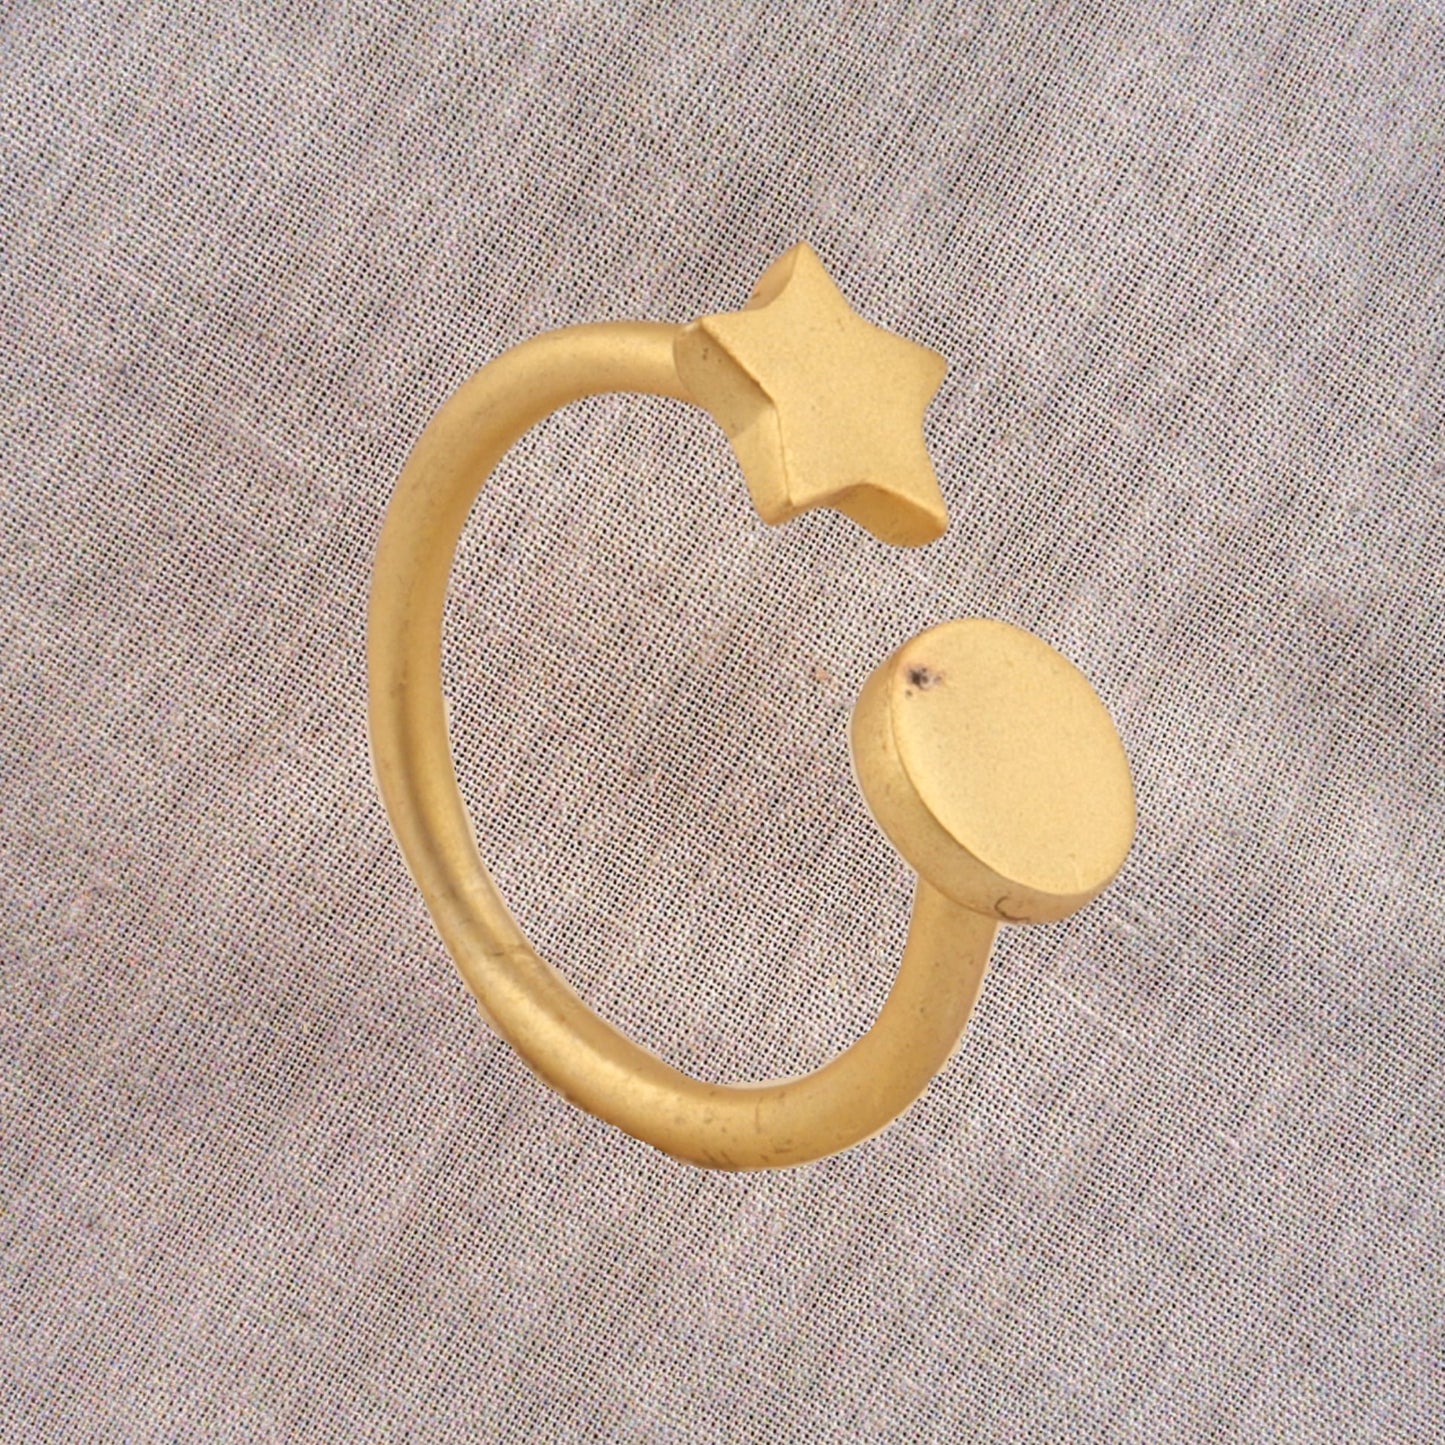 Handcrafted Adjustable Gold-Plated Ring with Circle and Star - SBJ